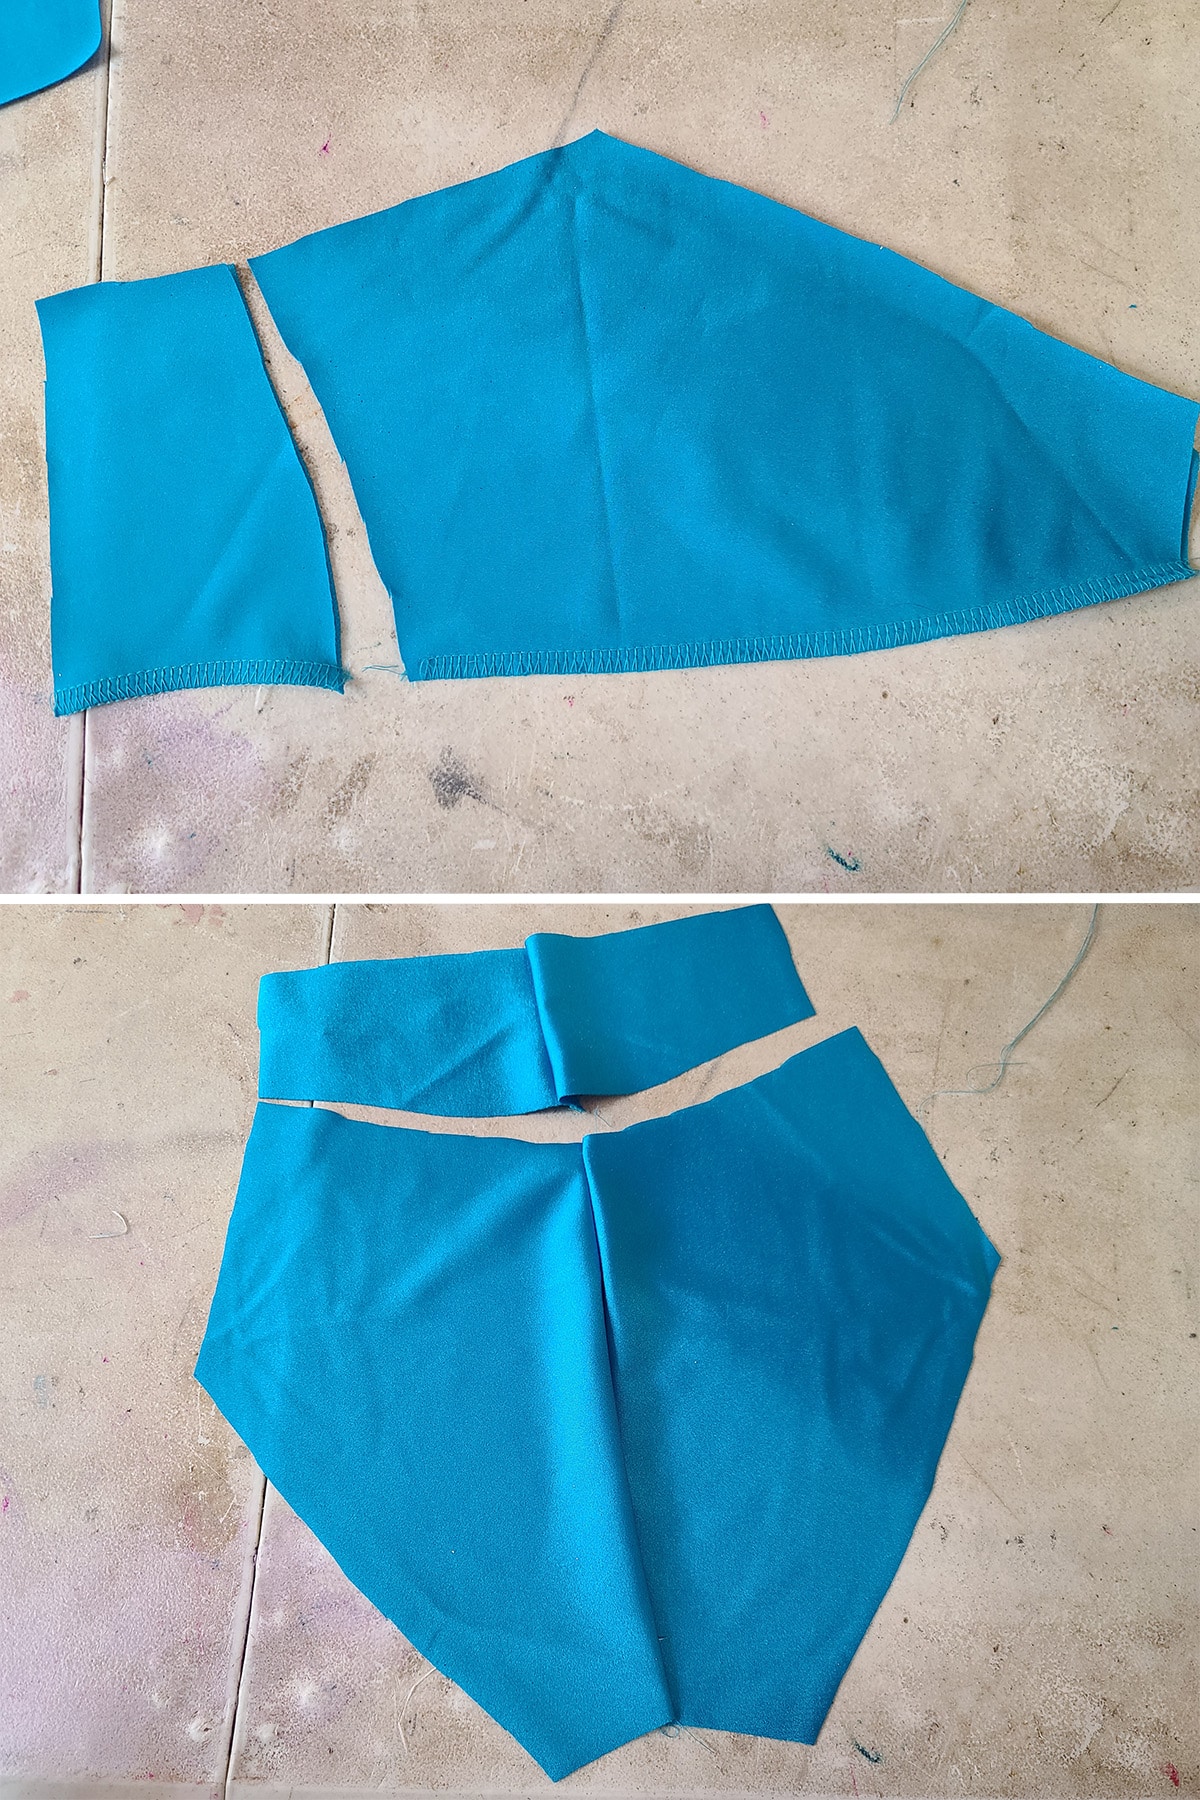 A two part image showing the center back seam of the yoke and briefs being sewn together.